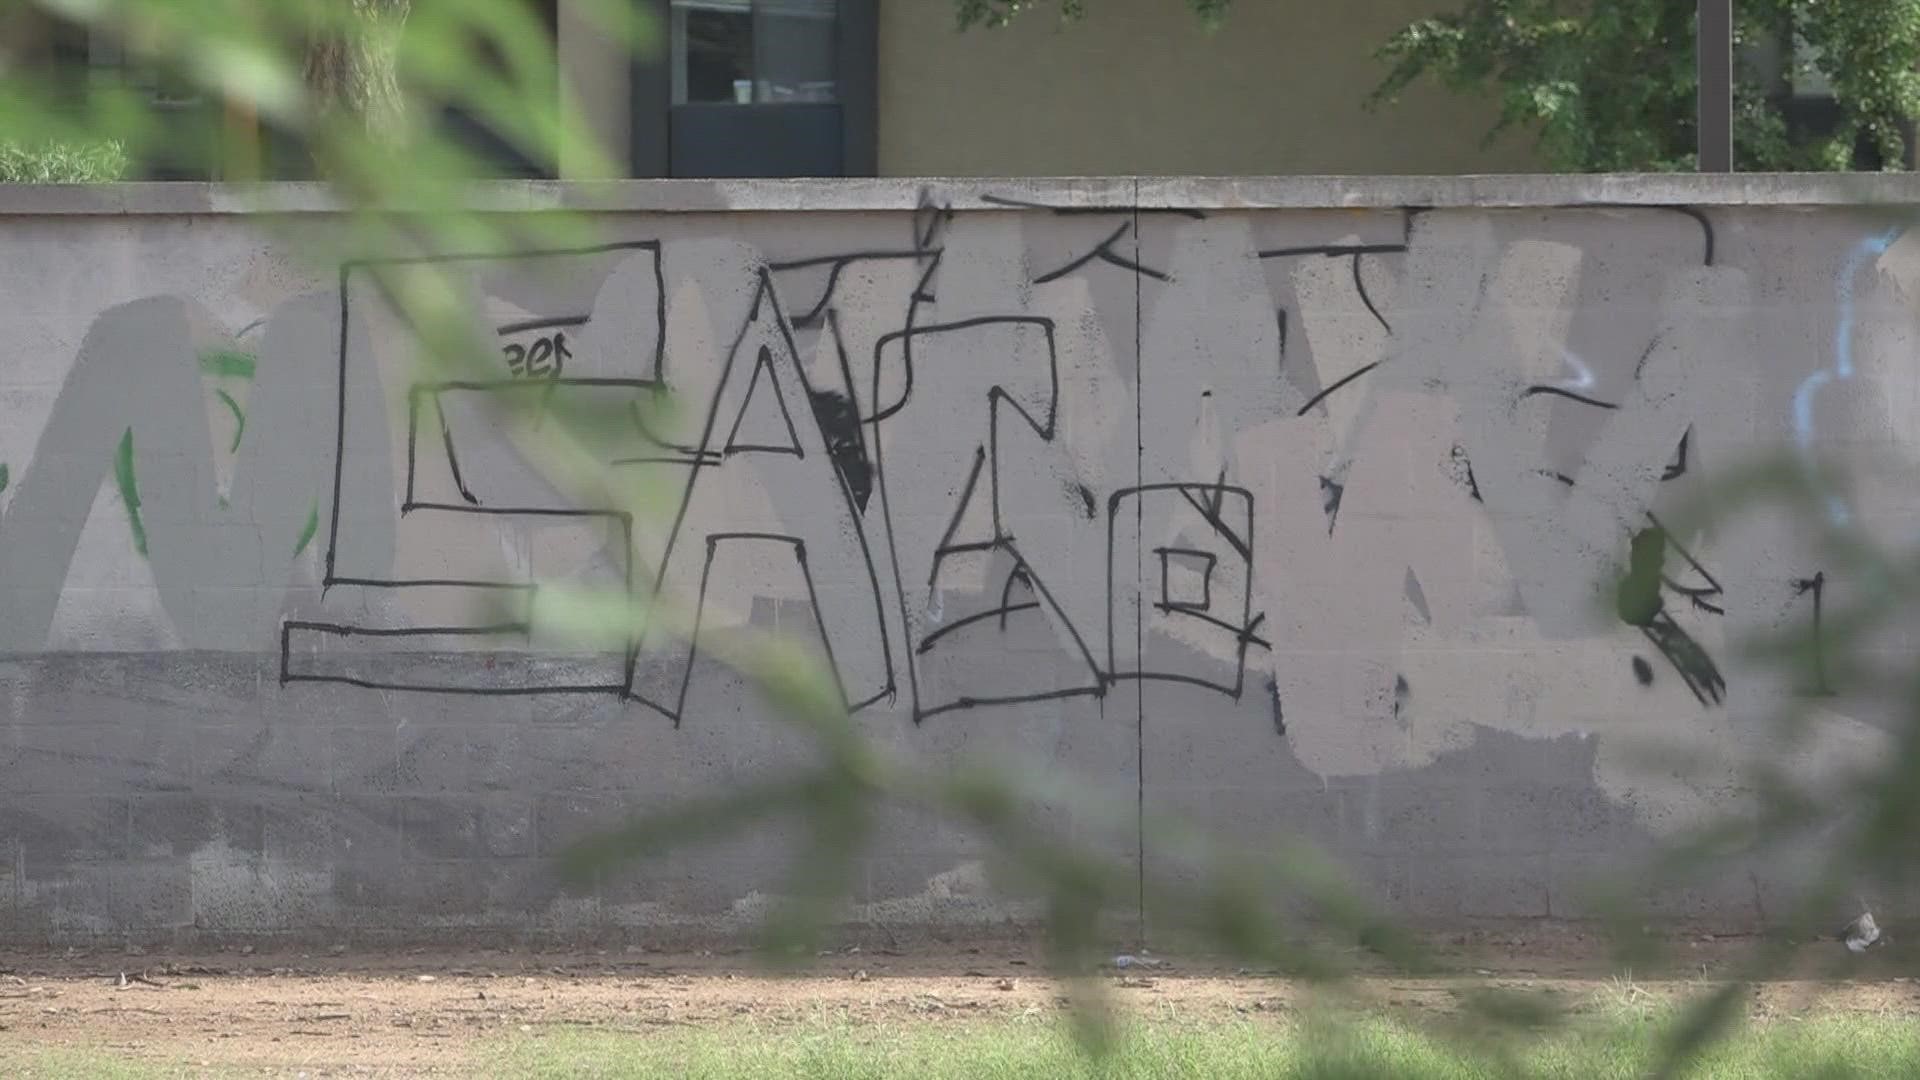 A 2021 survey from the City of Tempe says that for every 4 miles, there is an average of 8 graffiti tags.